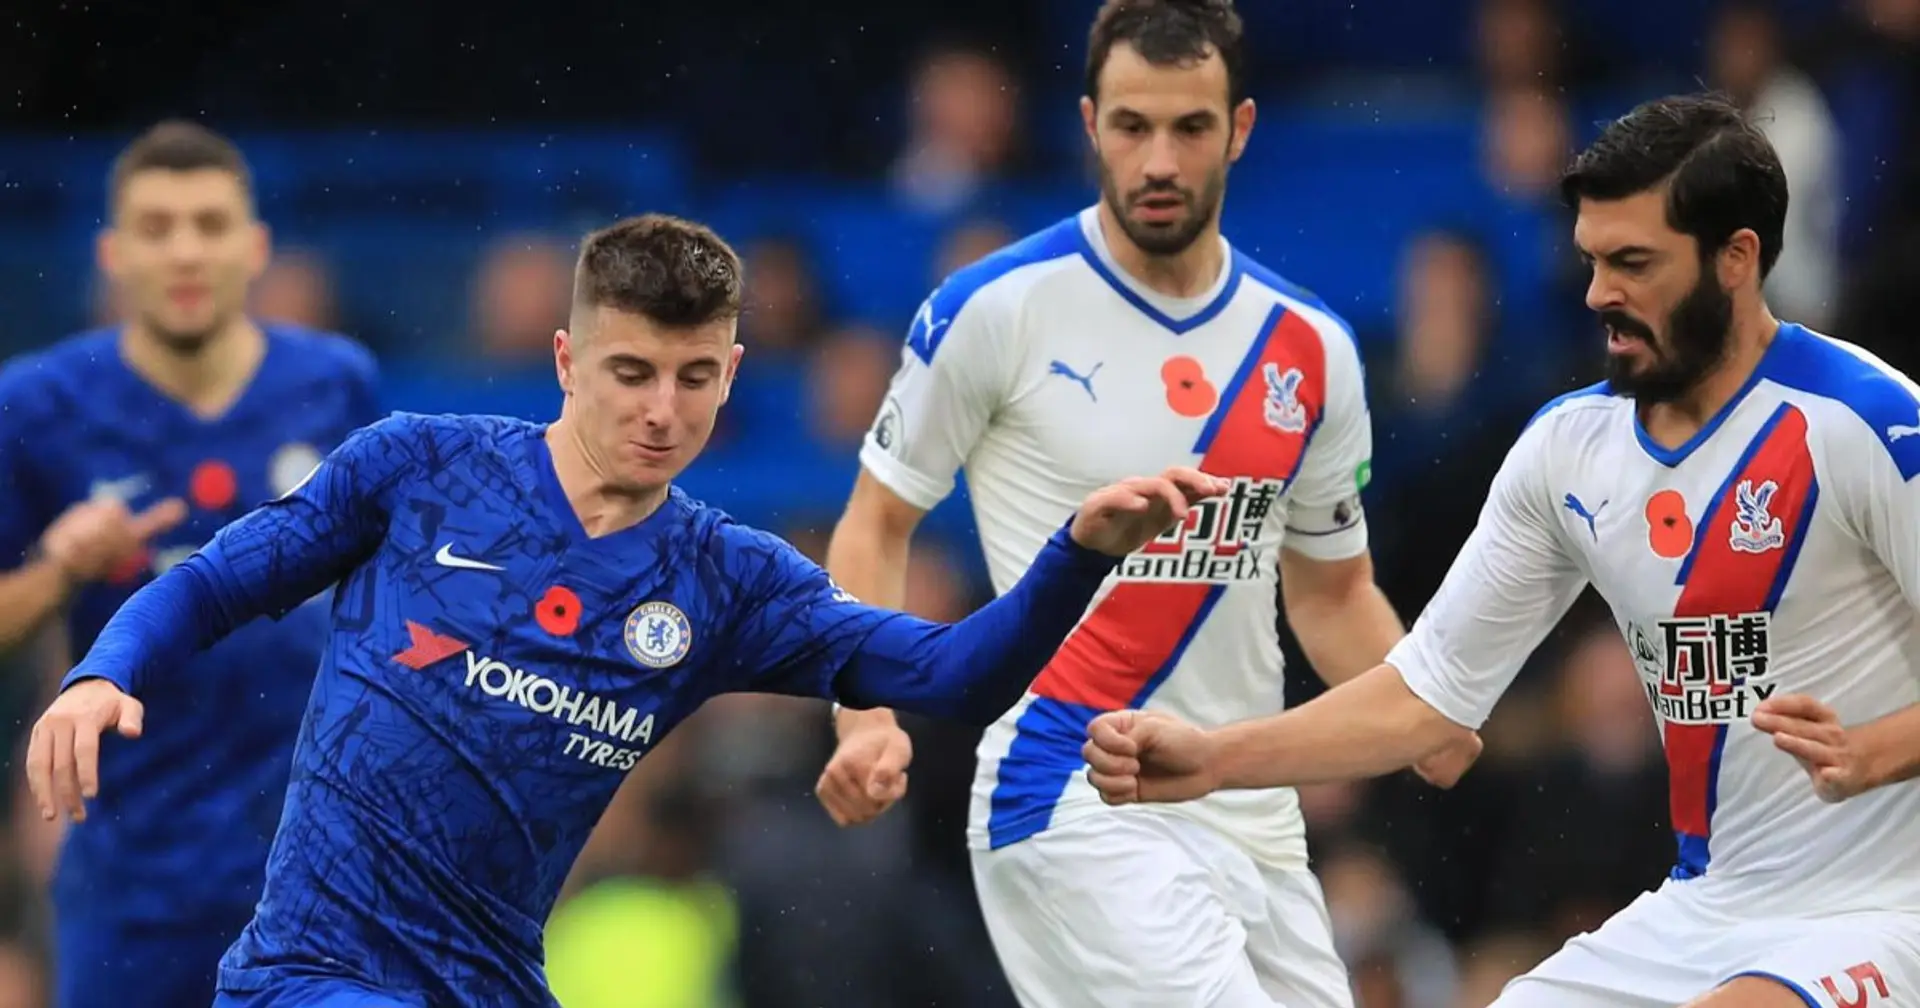 Crystal Palace vs Chelsea: line-ups, score predictions, key stats & more - preview